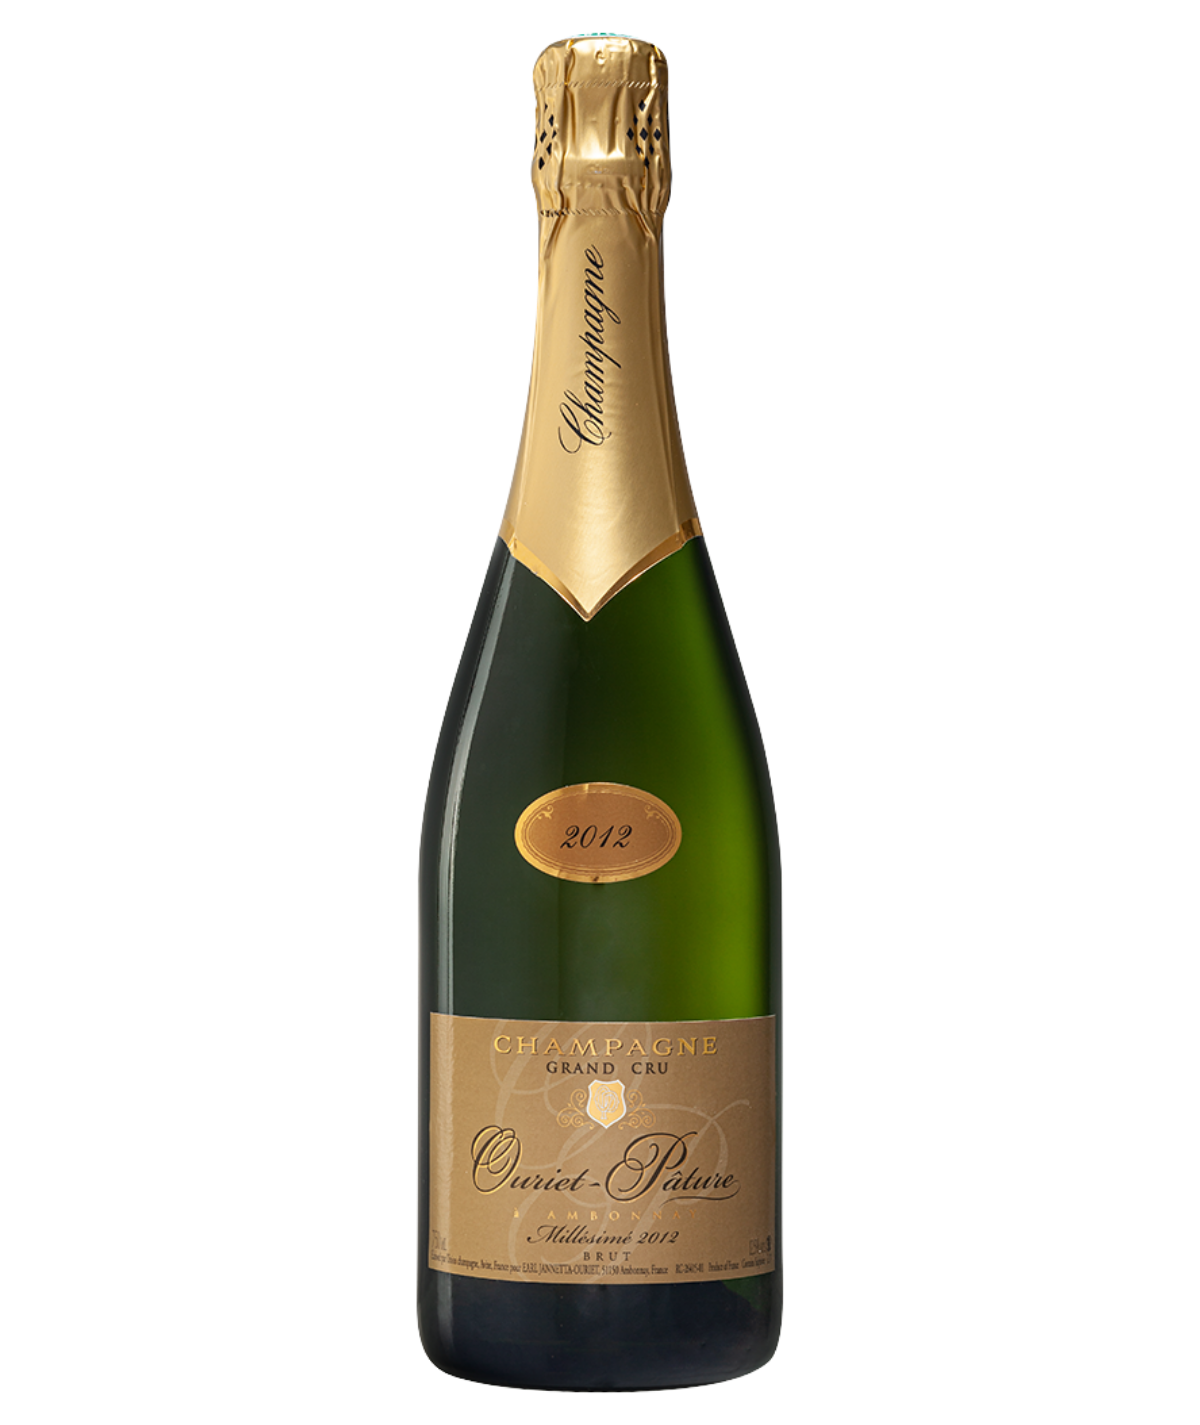 OURIET-PATURE Grand Cru Jahrgangs 2012 Champagner